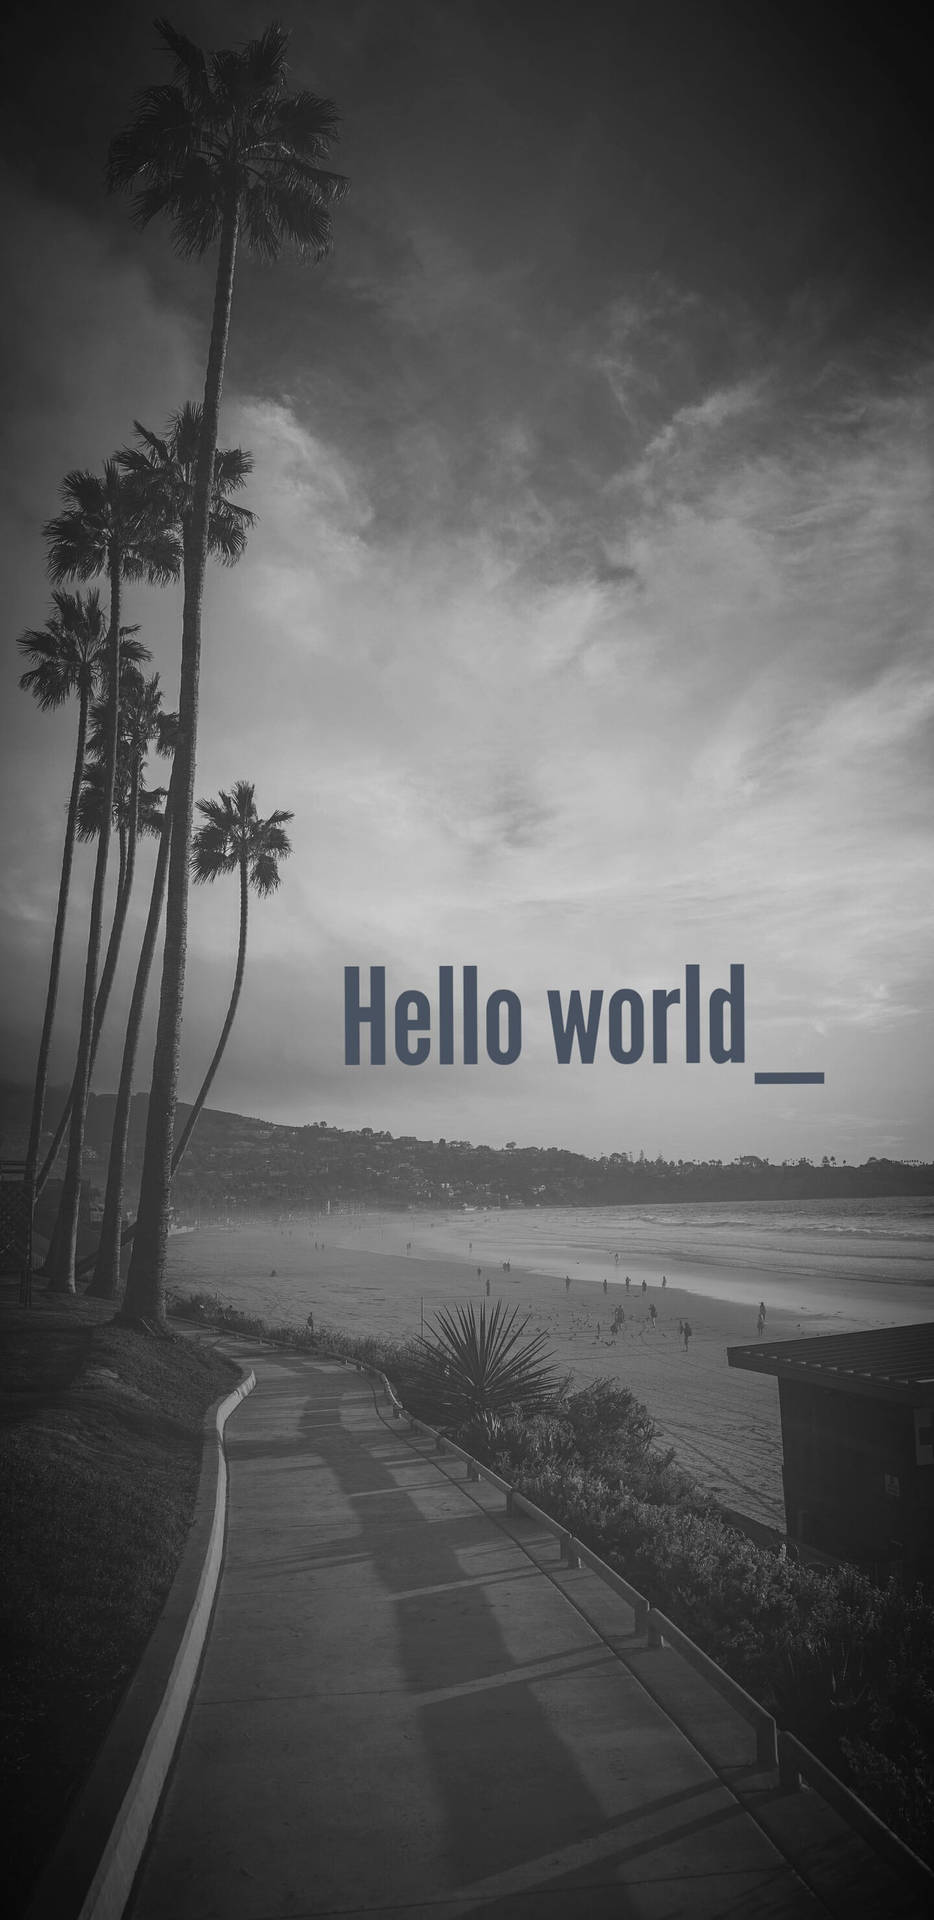 Programming Iphone Hello World On Road By Beach Background